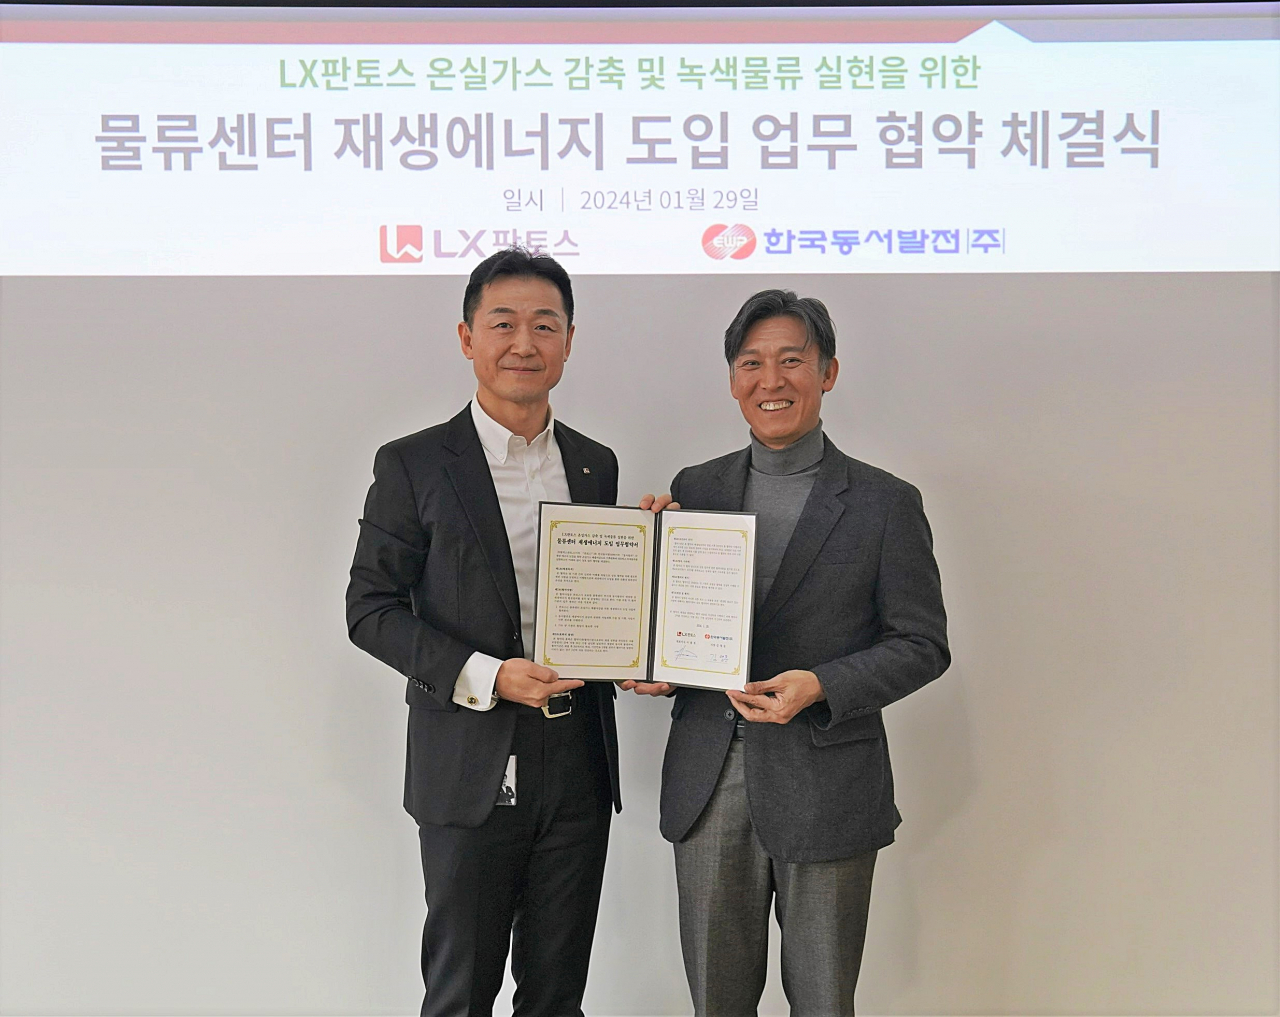 LX Pantos CEO Lee Yong-ho (left) and Korea East-West Power Corp. CEO Kim Young-moon pose for a photo after a signing event at LX Pantos’ headquarters in Jongno-gu, central Seoul, Tuesday. (LX Pantos)